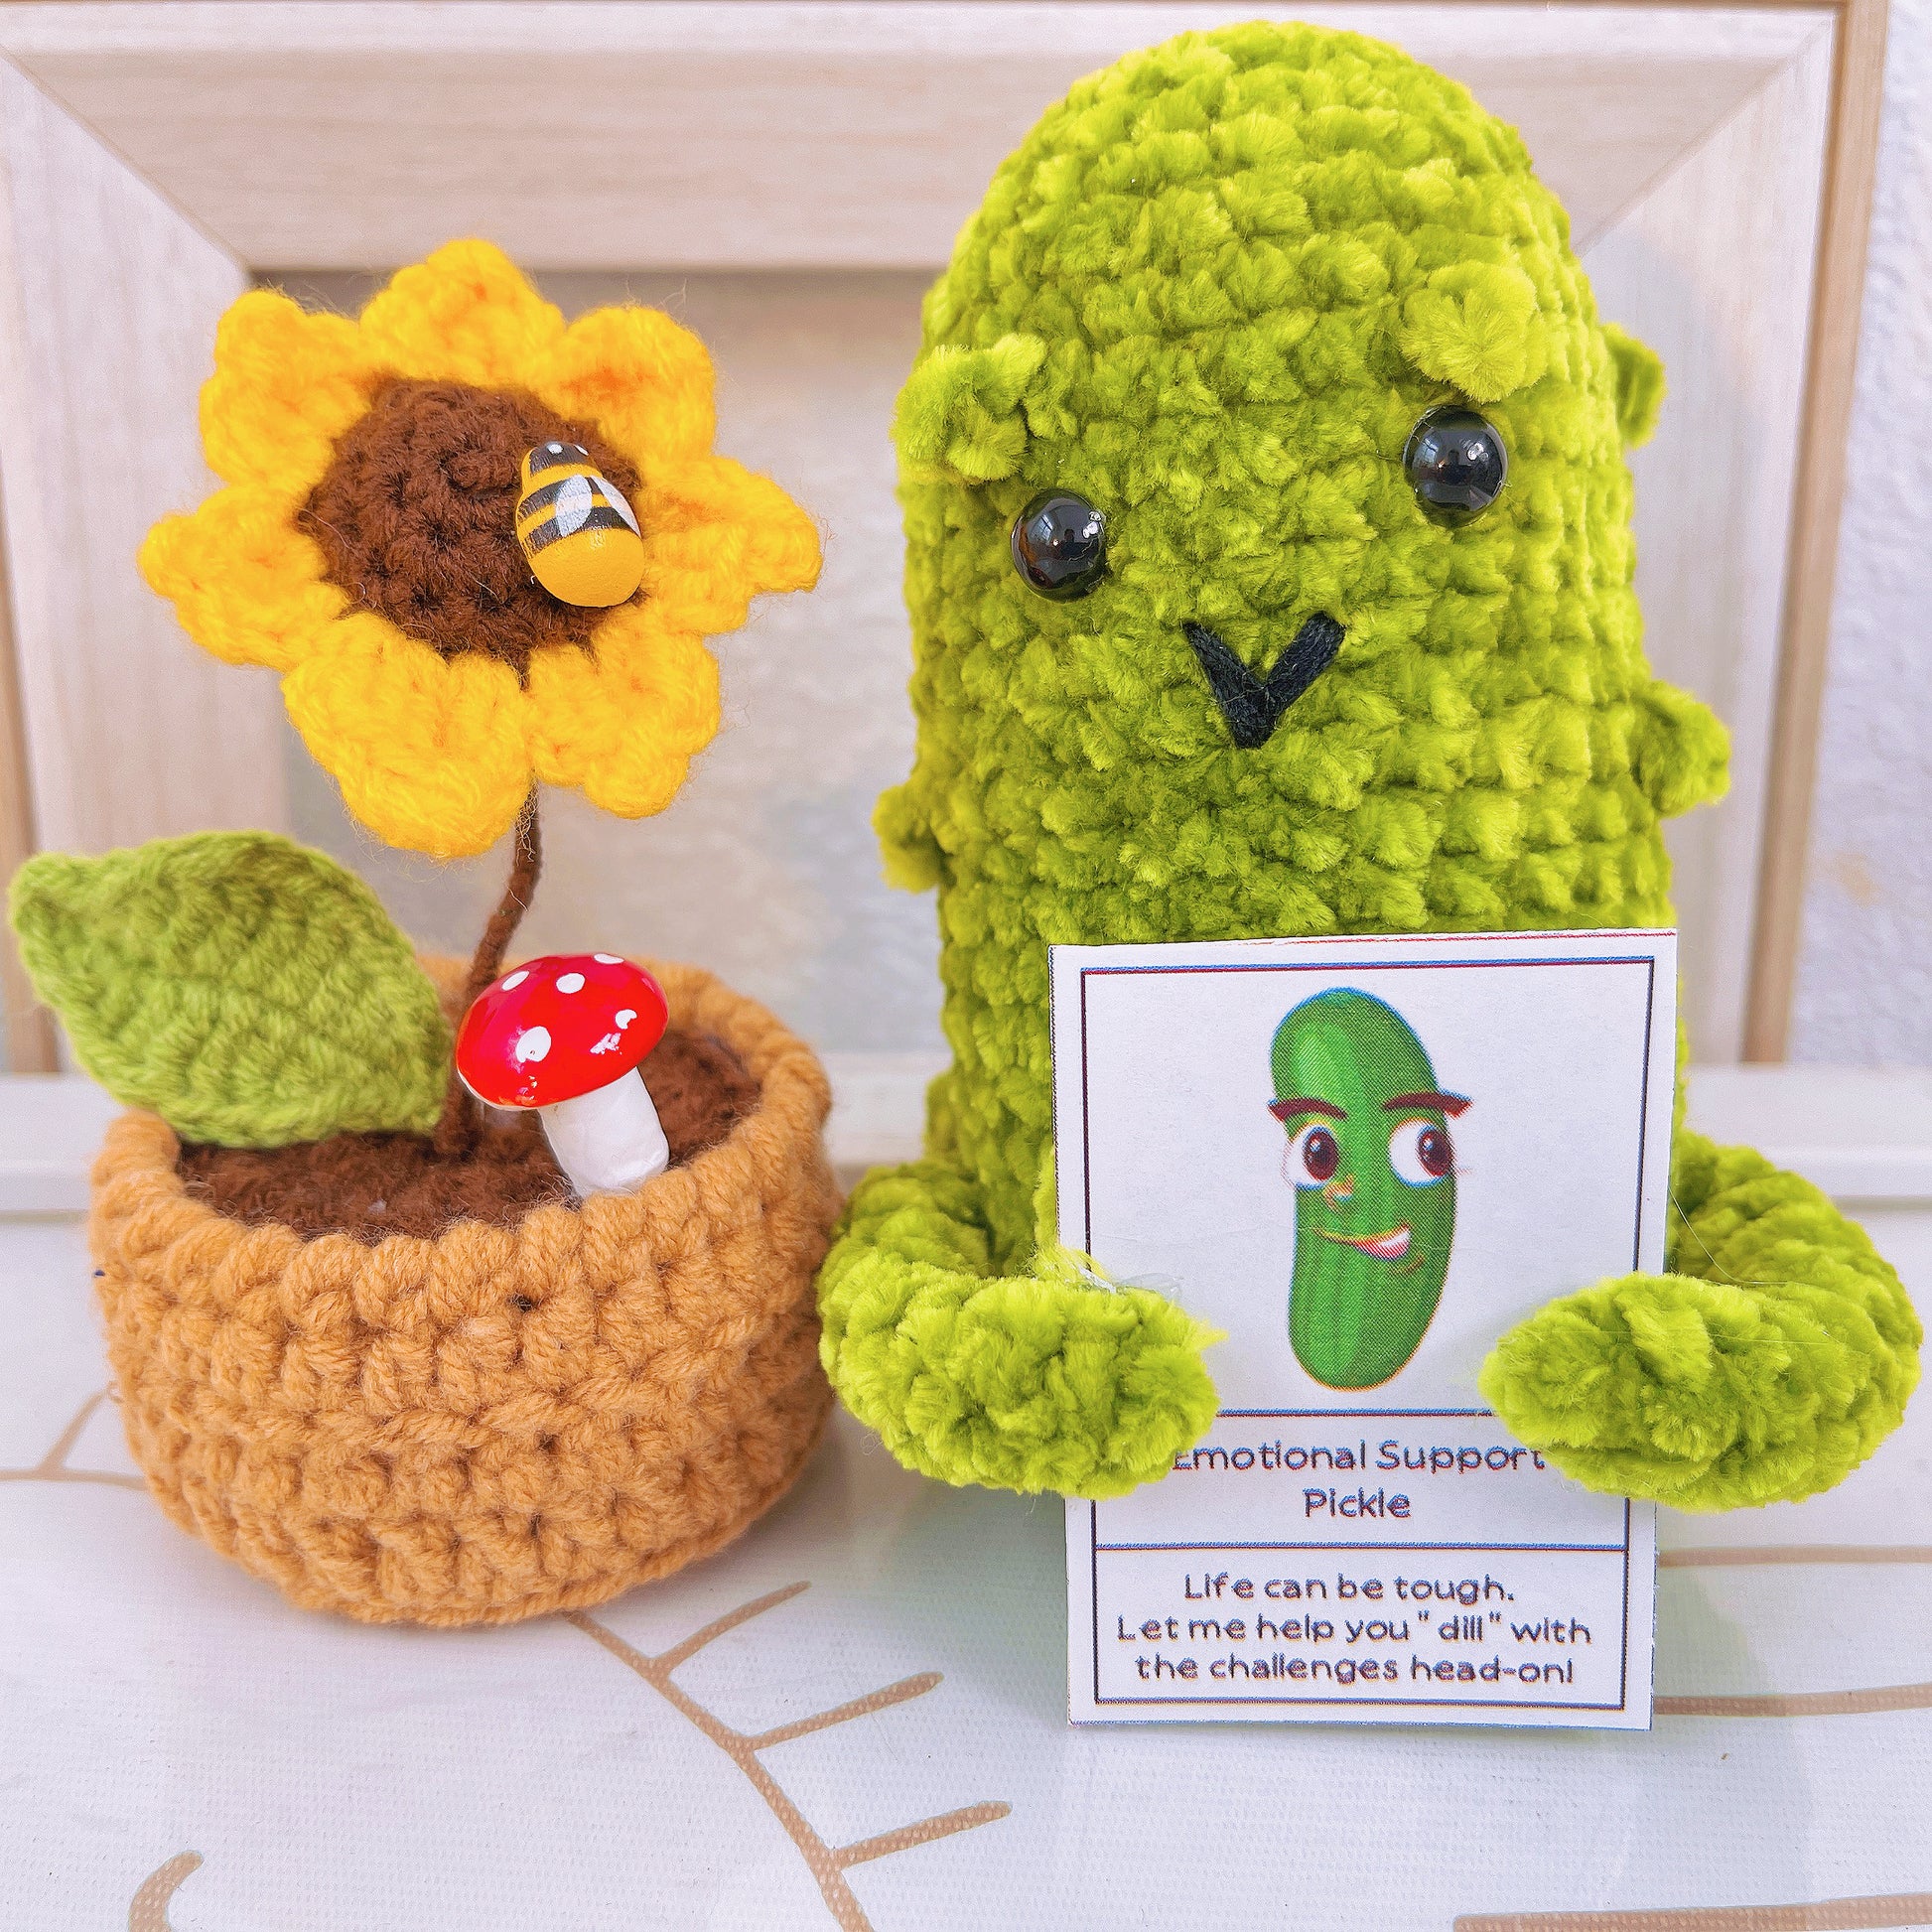 Handcrafted Crochet Supportive Pickle and Blossomed Pot Bundle Set